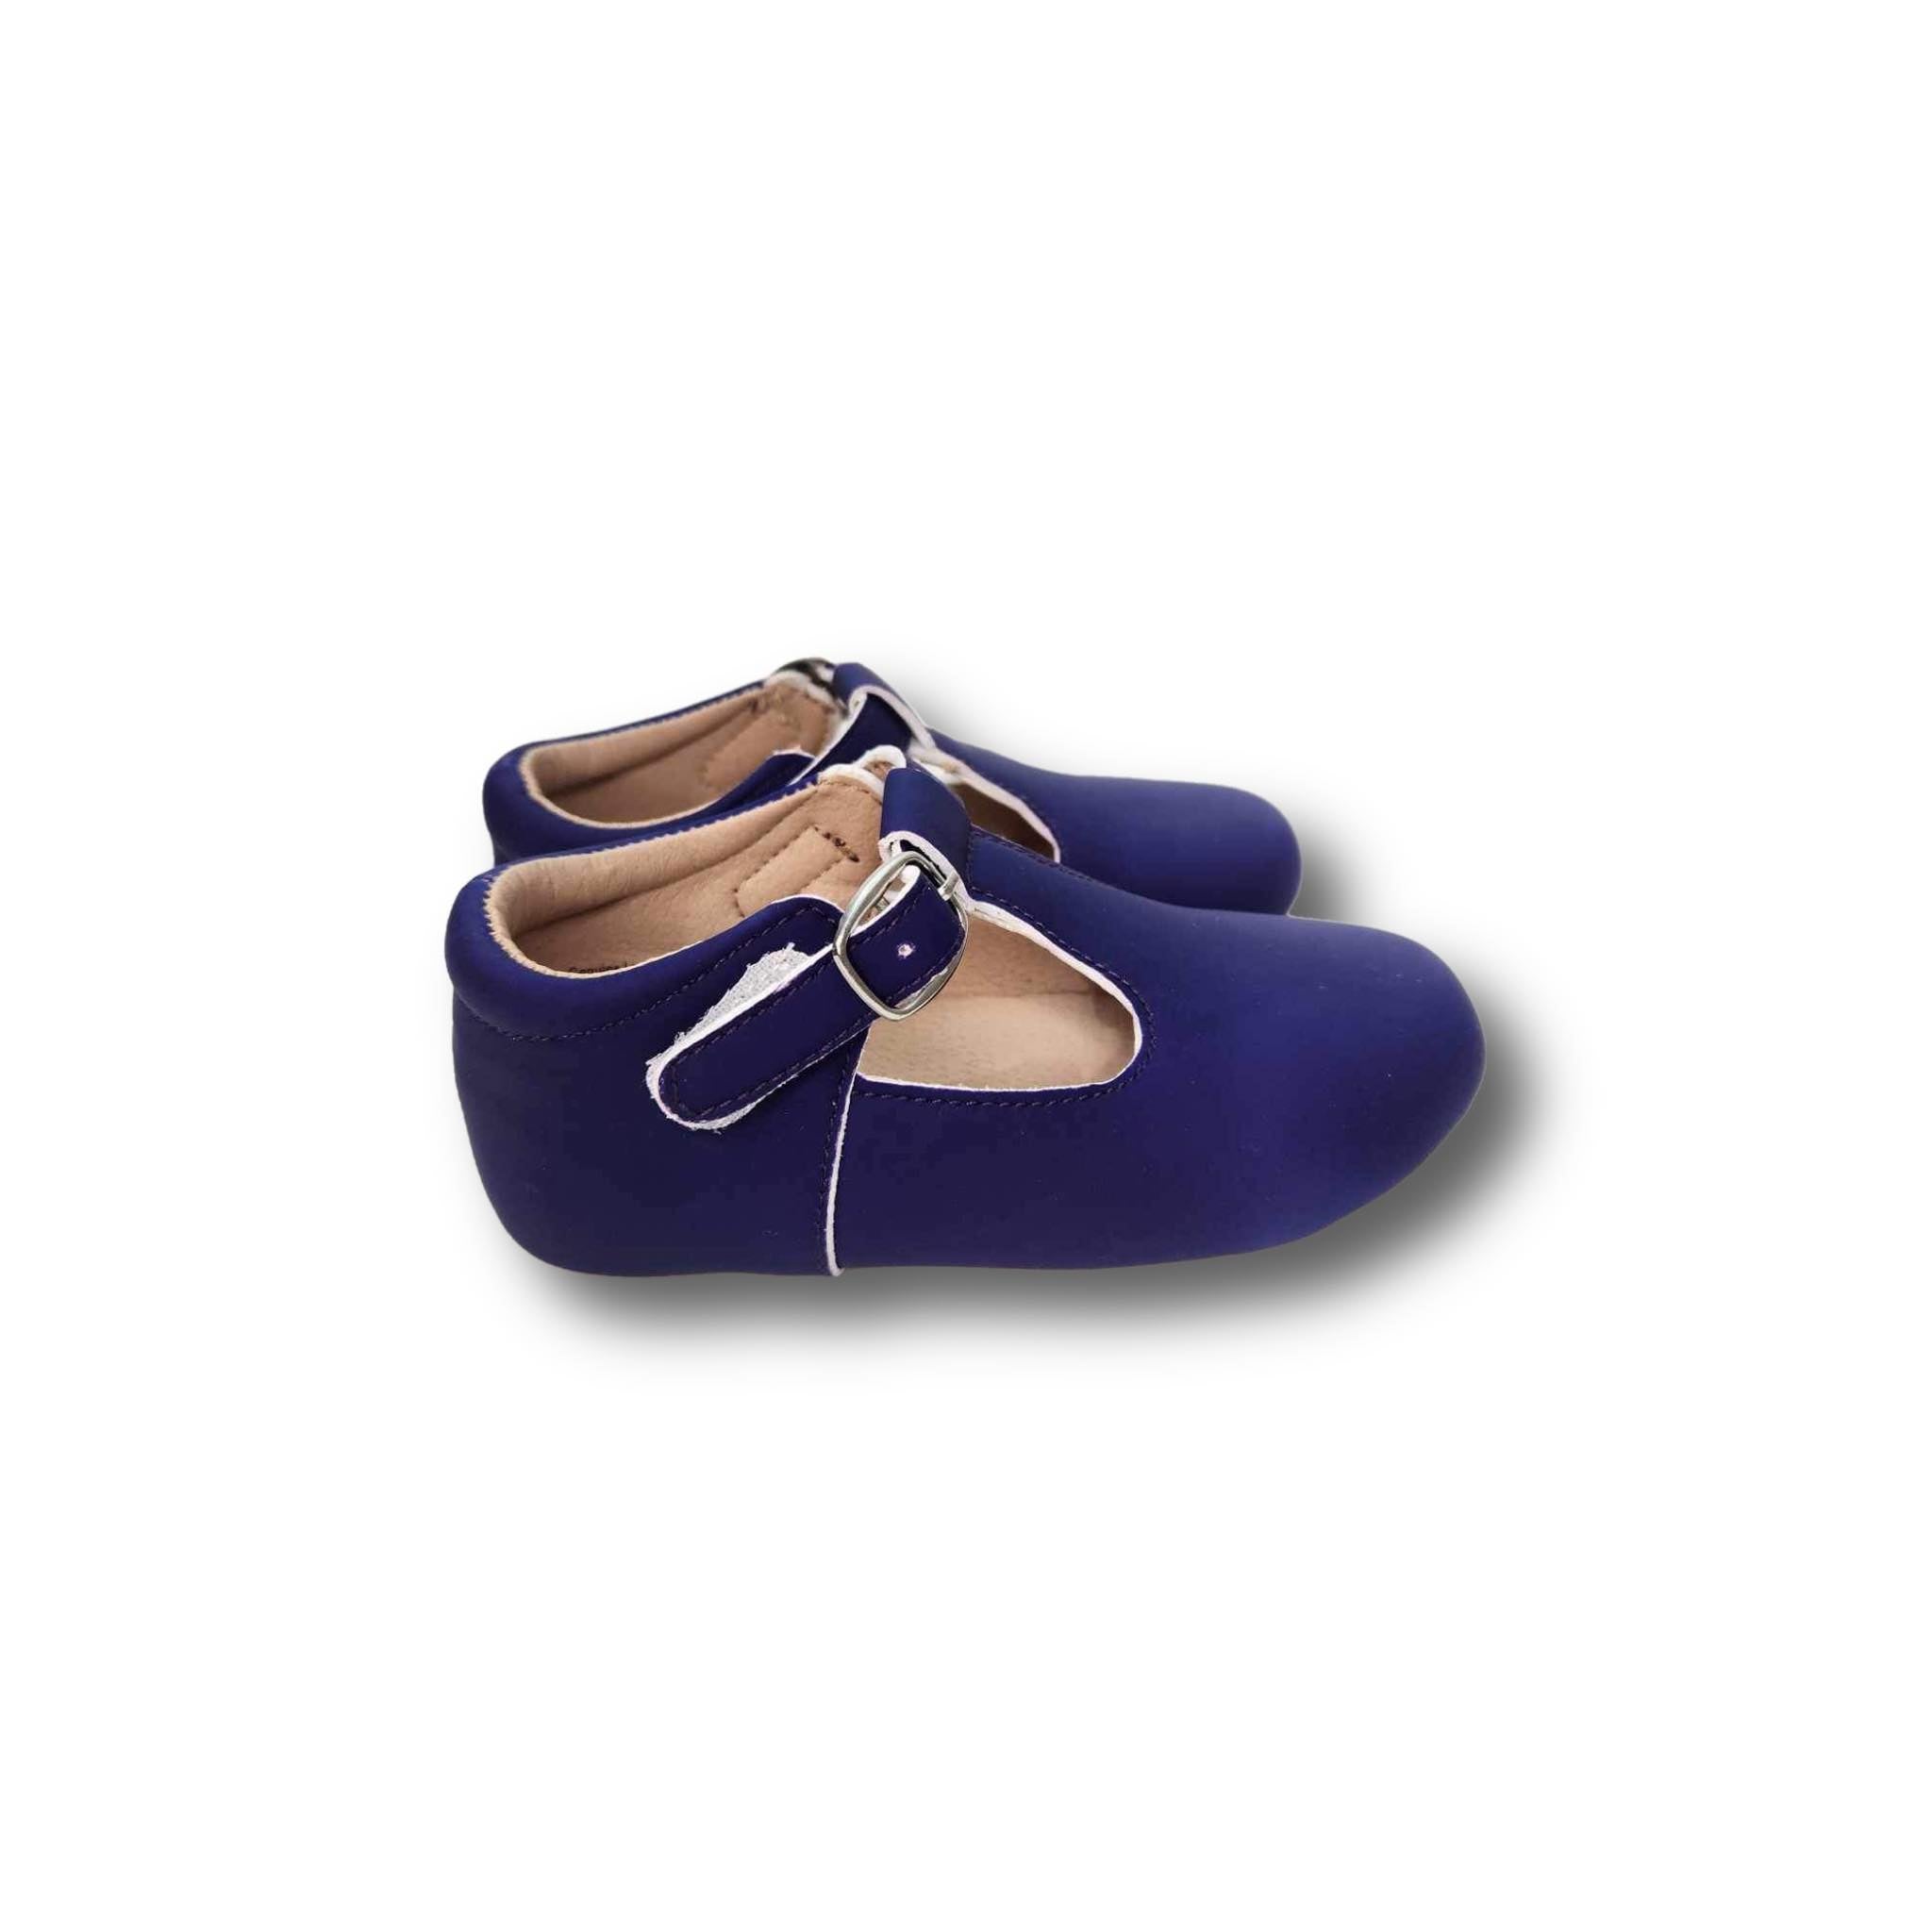 AUBREIGH Children's T-Strap Shoe in Color Changing Purple and Pink